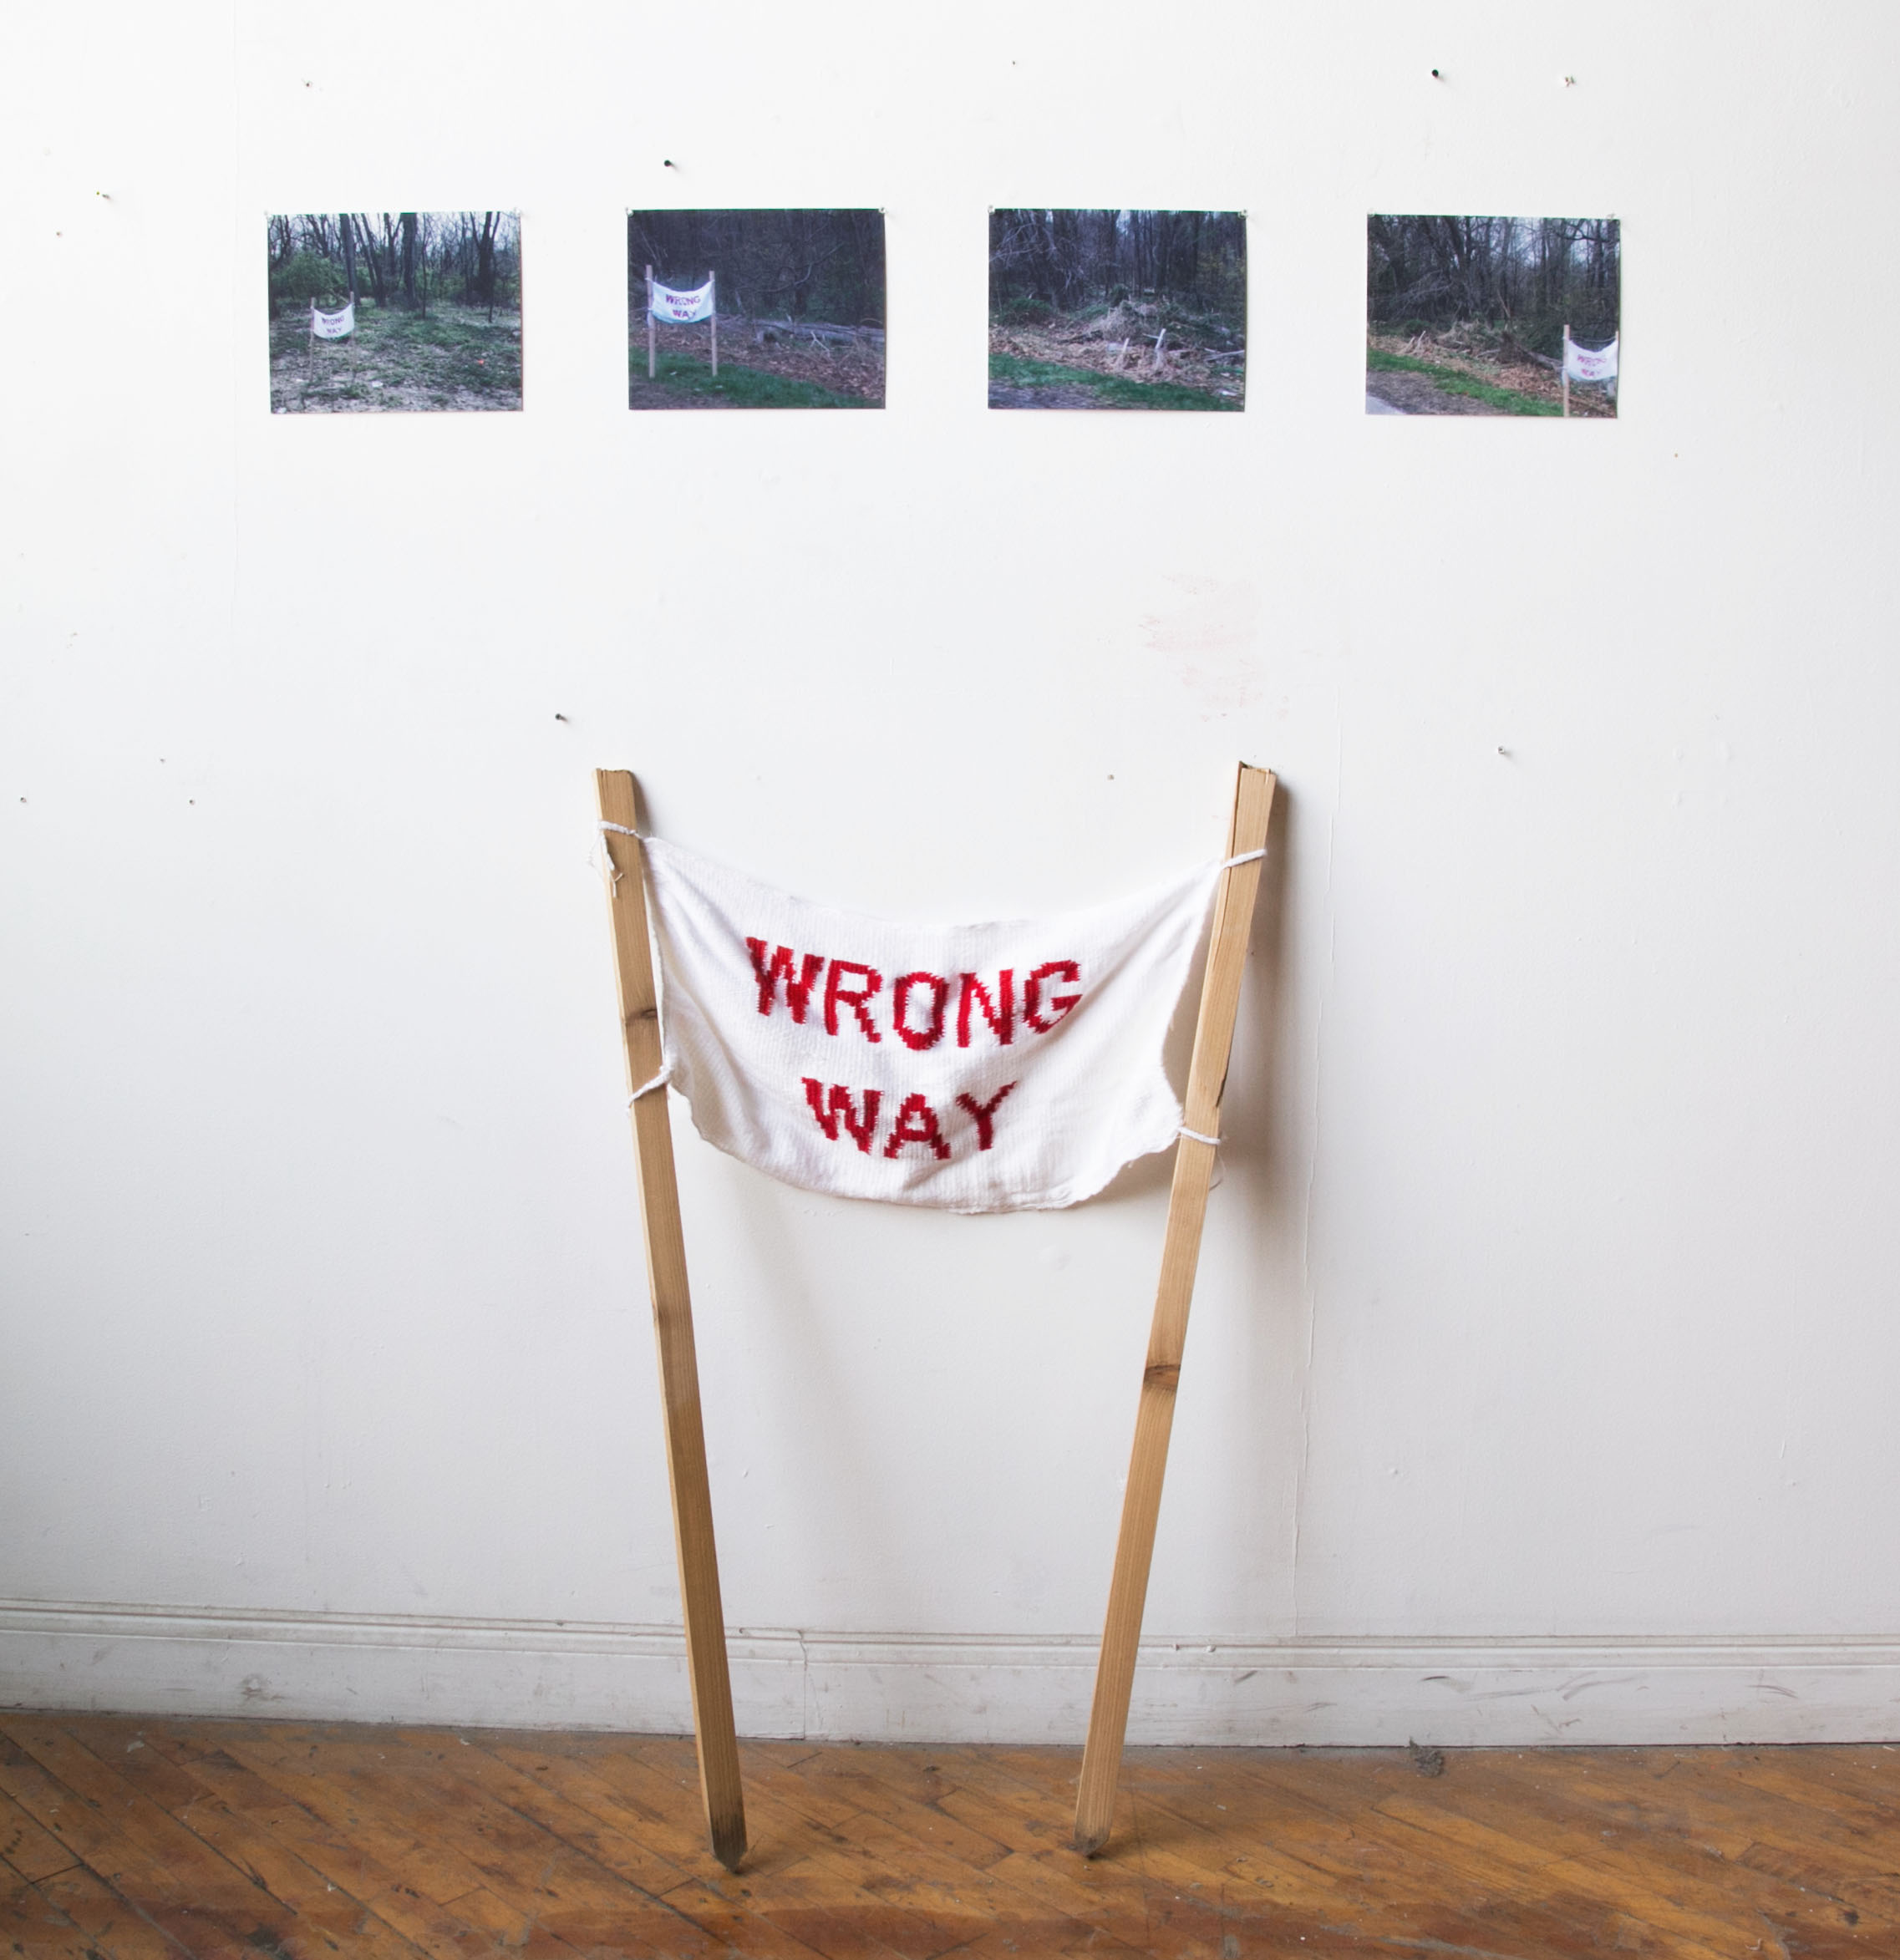   wrong way   handwoven sign + site specific installation documentation  2018   